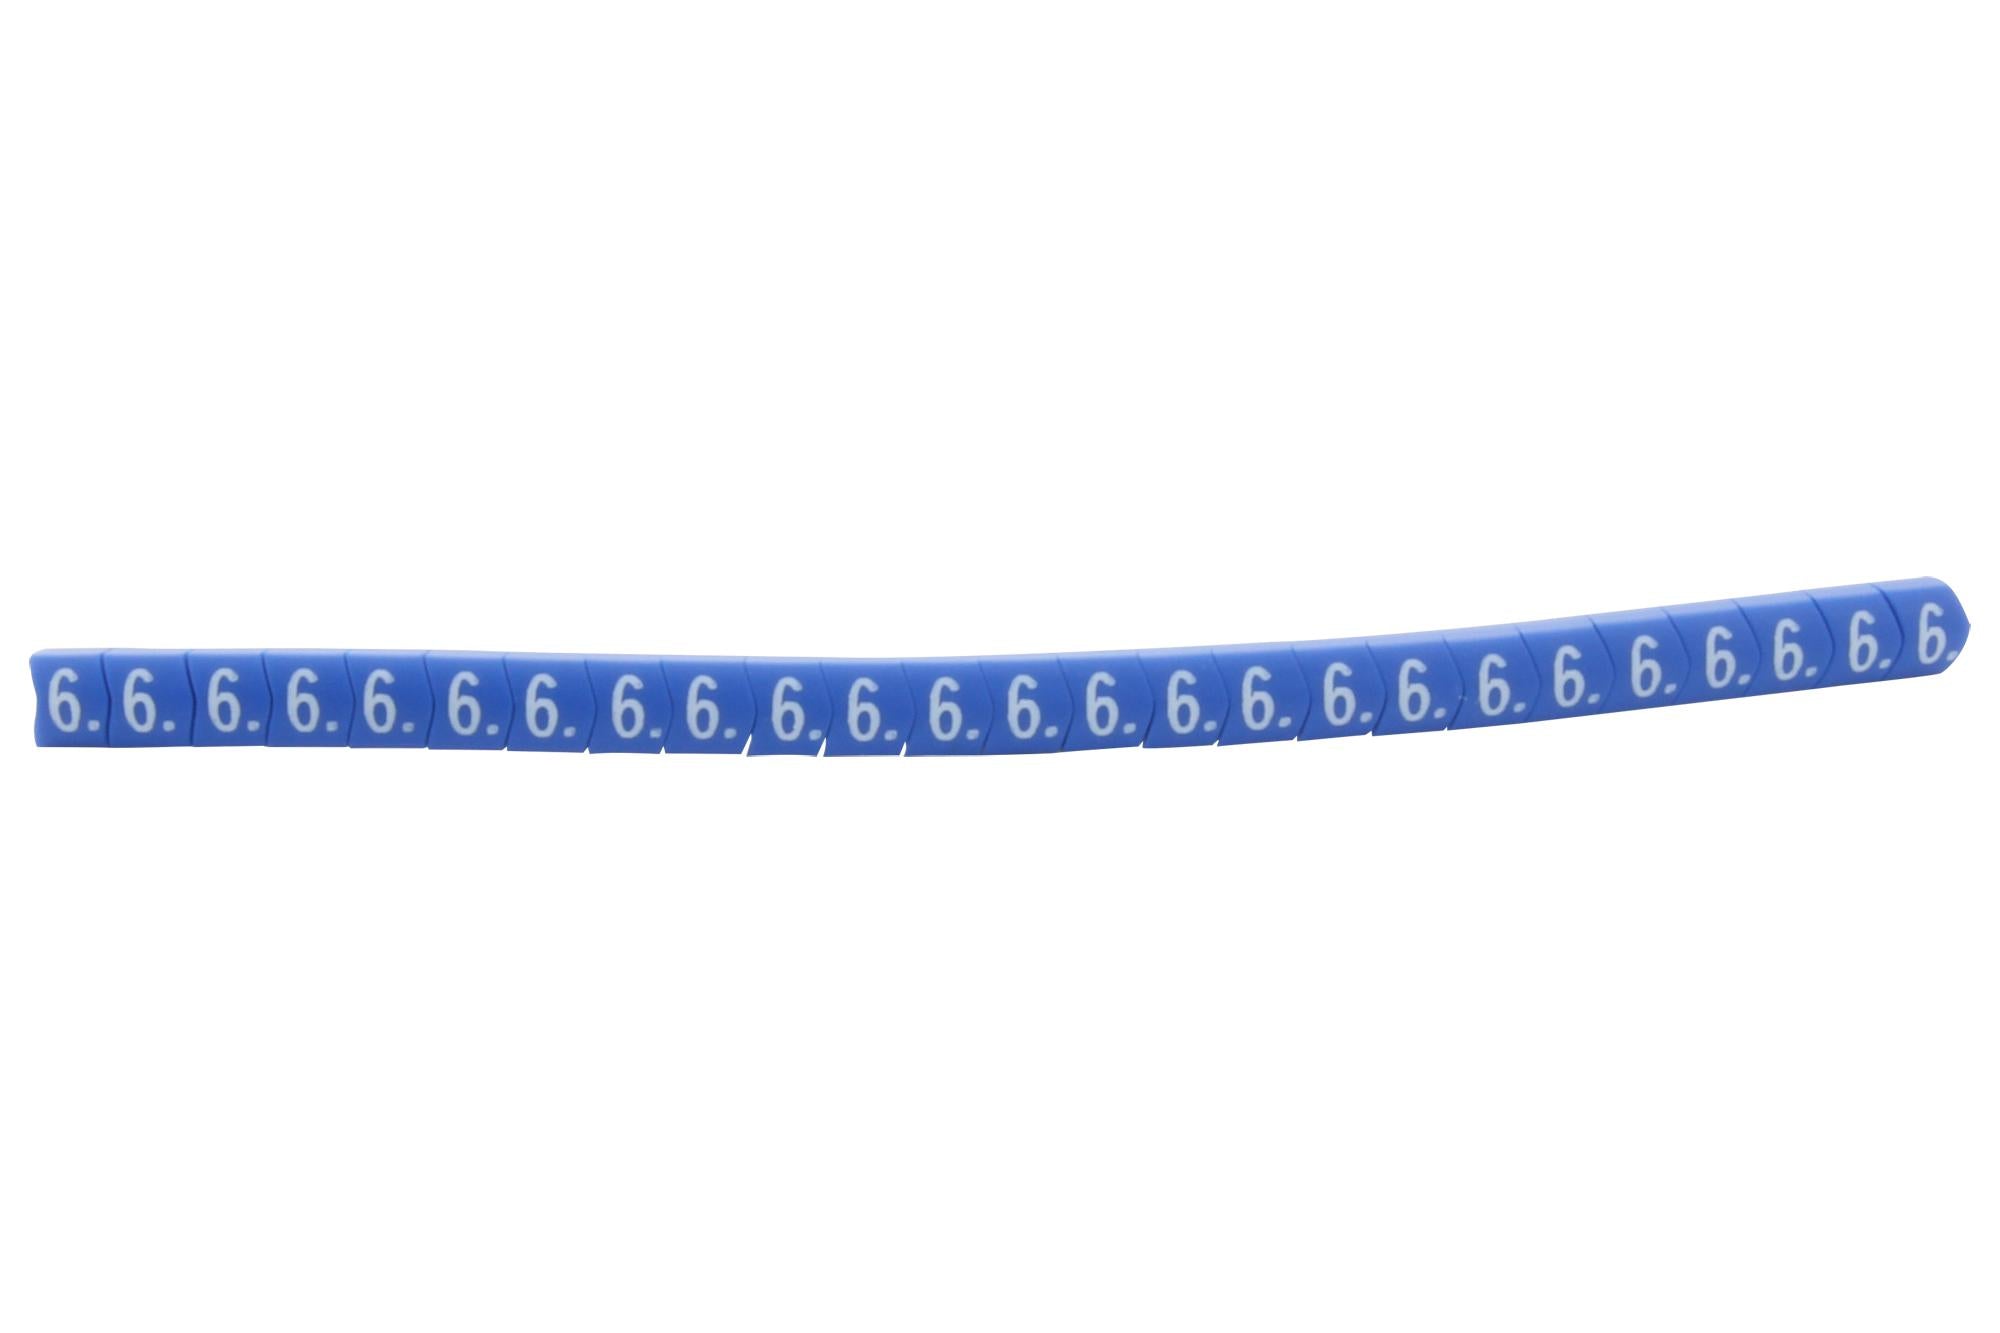 901-11056 CABLE MARKER, PRE PRINTED, PVC, BLUE HELLERMANNTYTON